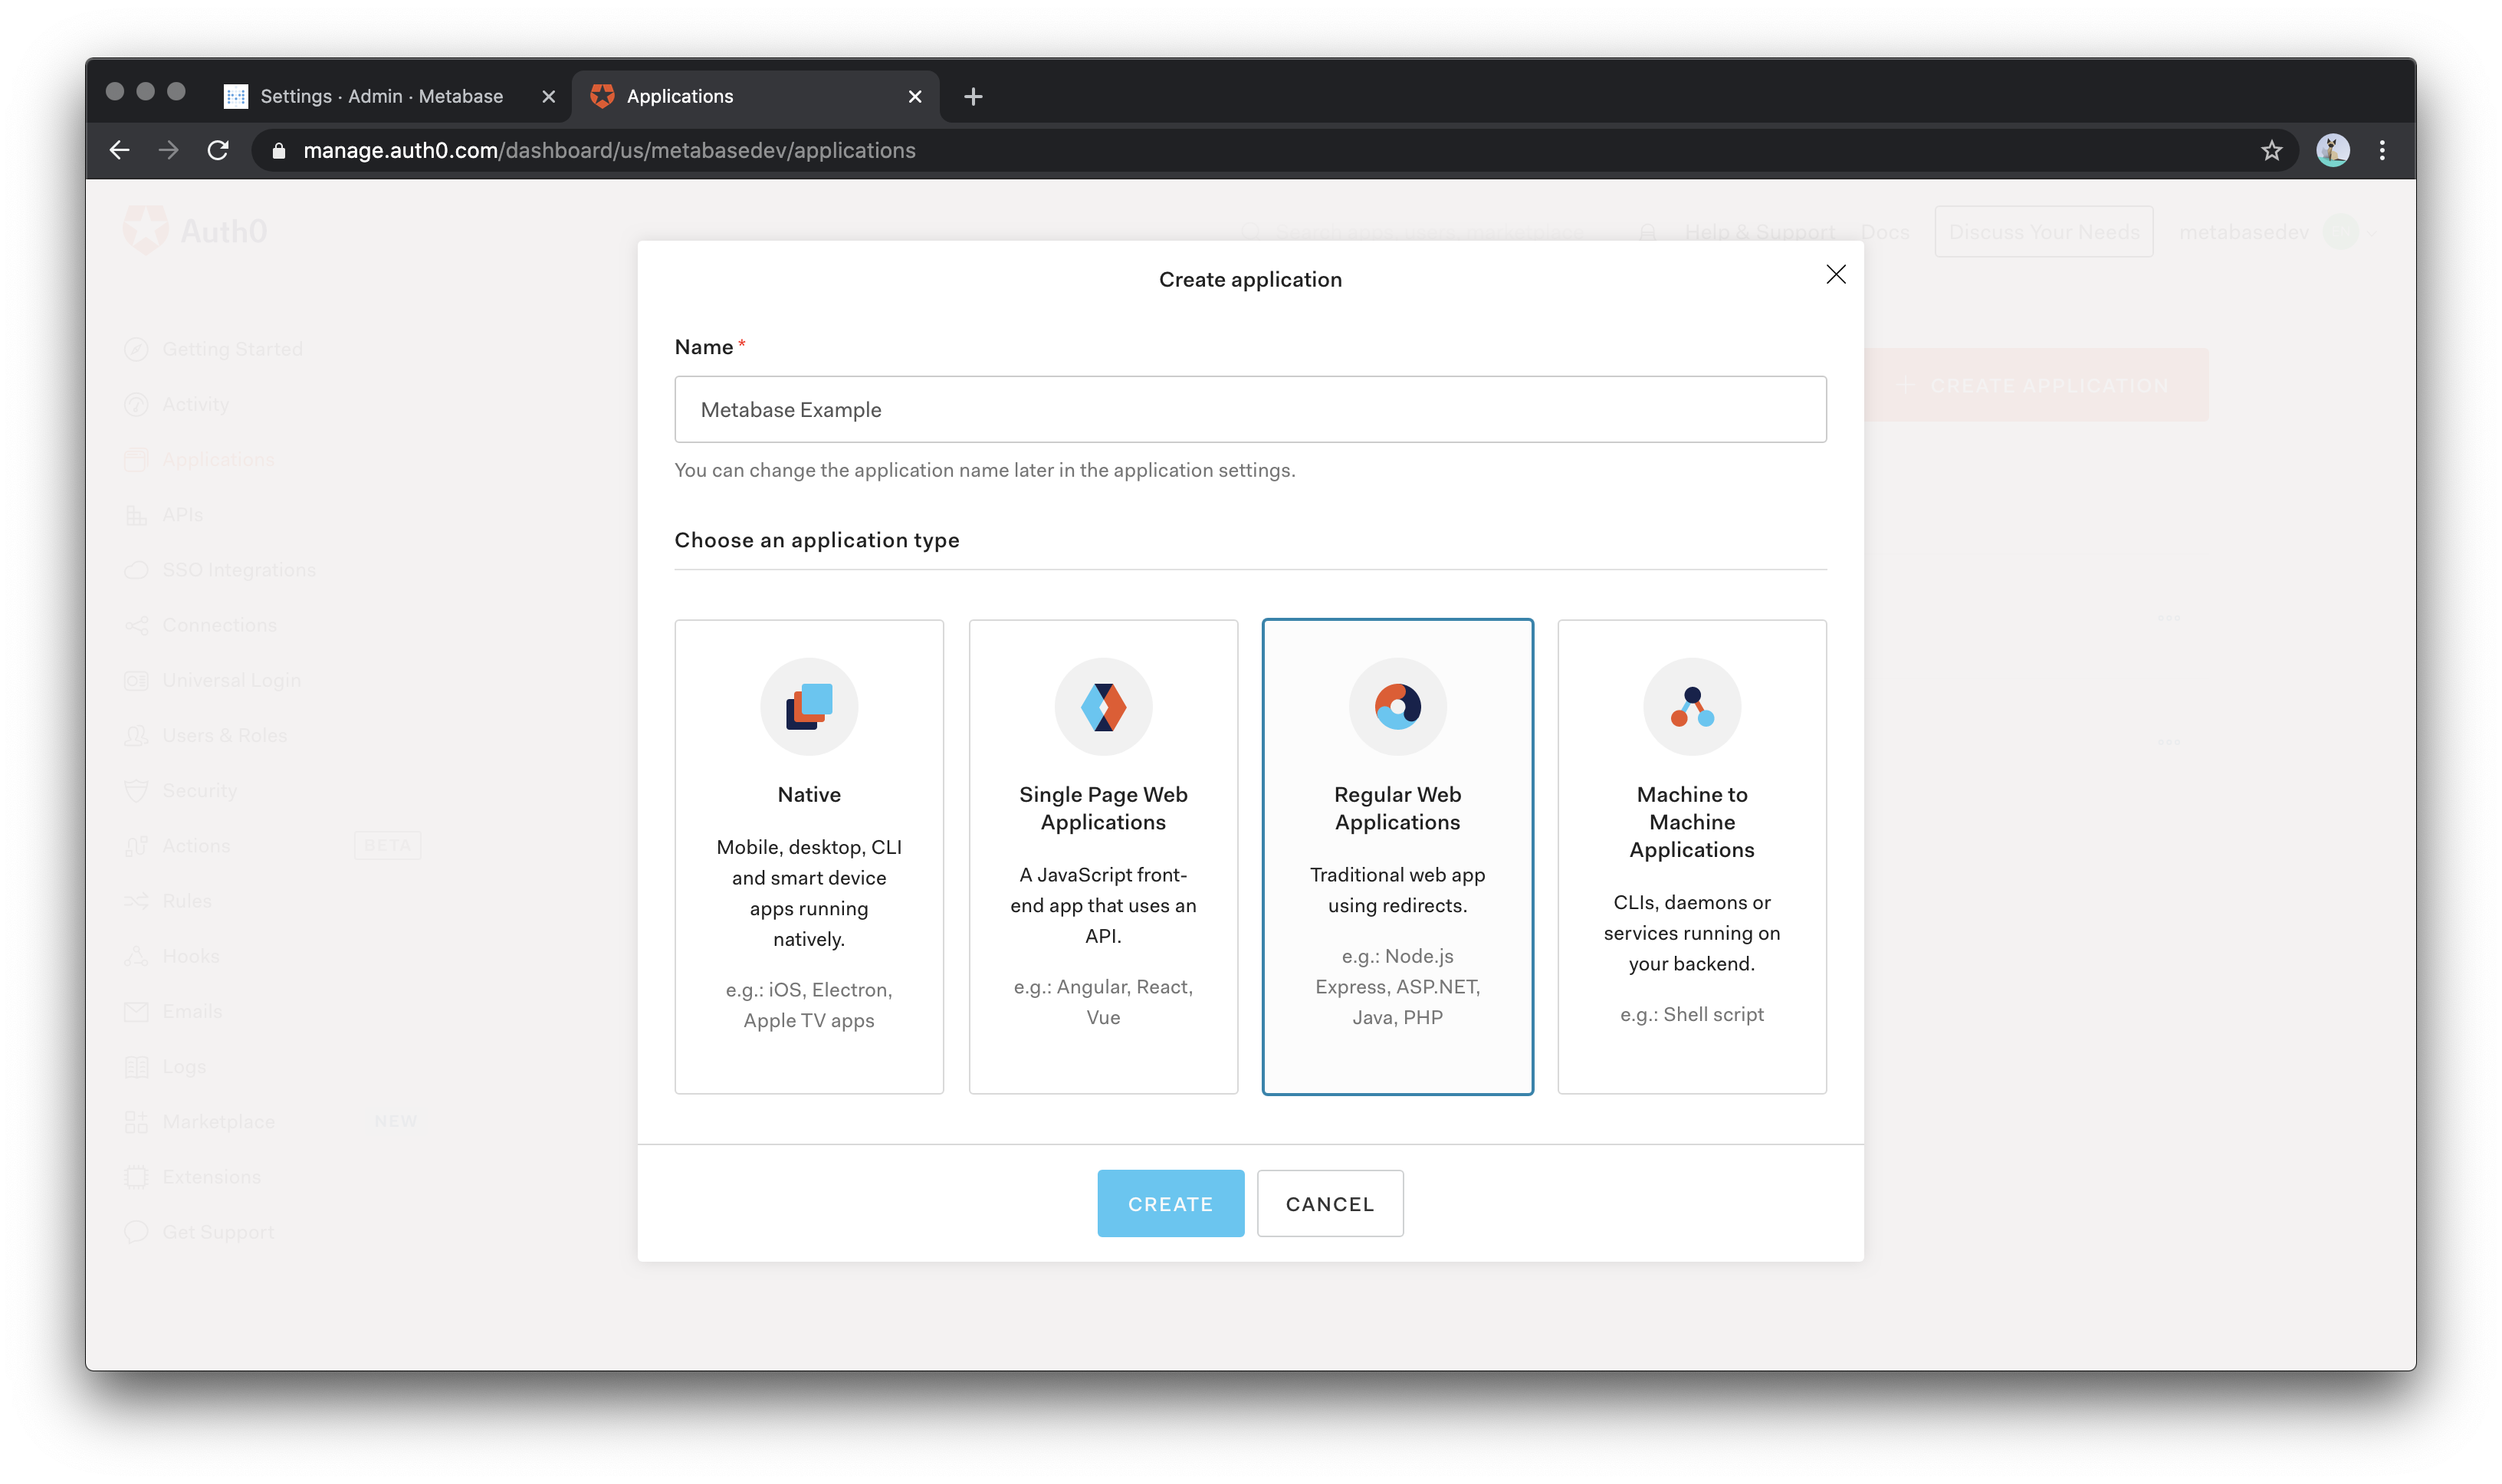 Auth0 Application Selection